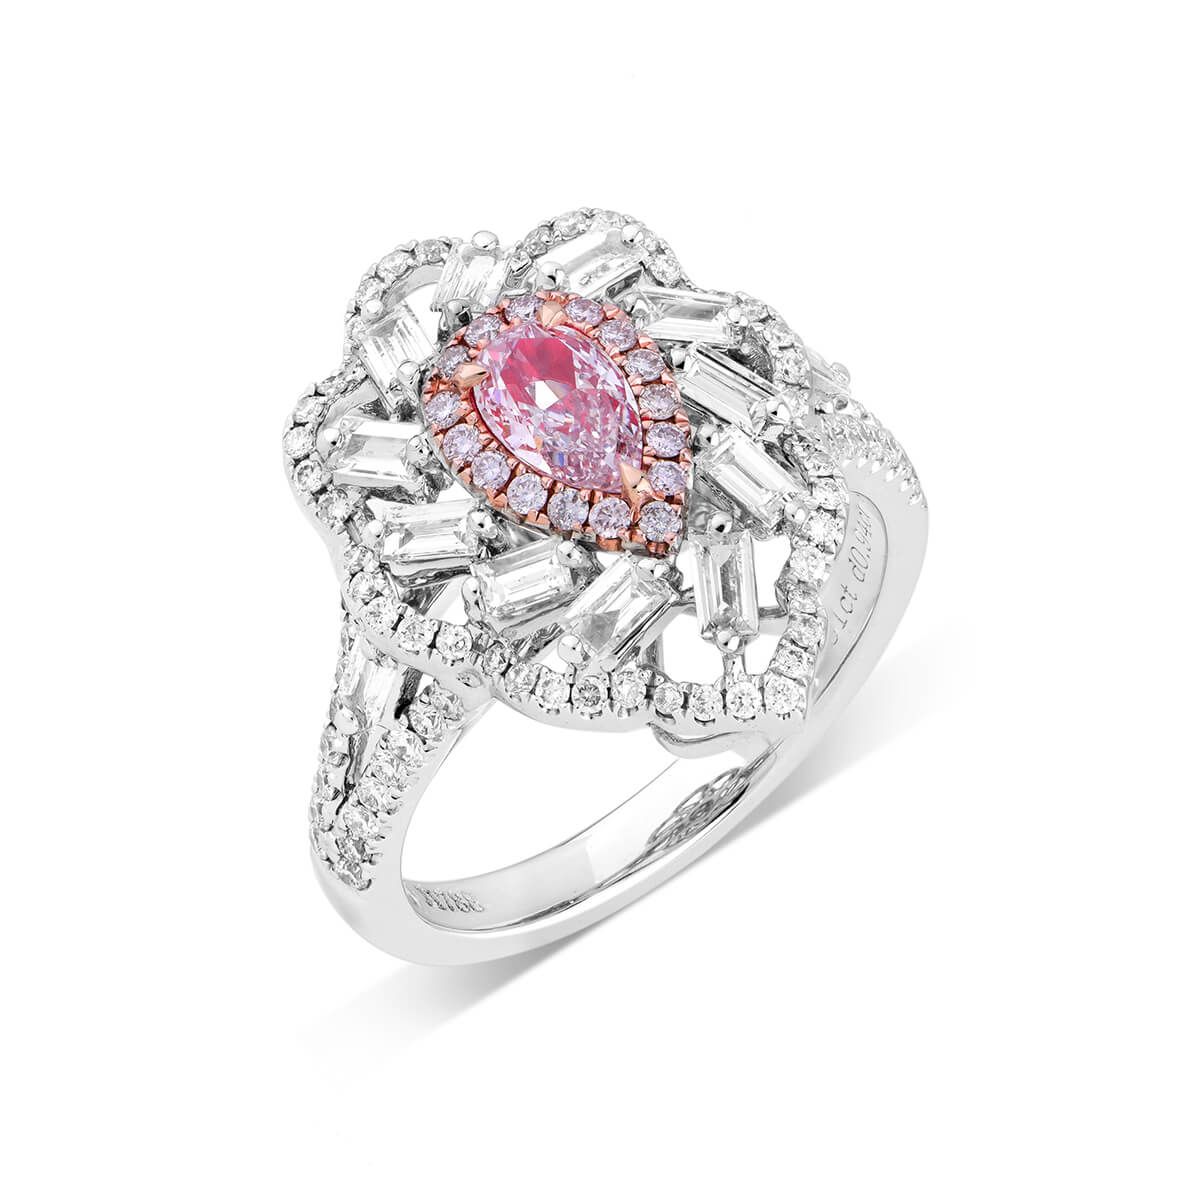 Faint Pink Diamond Ring, 1.25 Ct. TW, Pear shape, GIA Certified, 1279622382